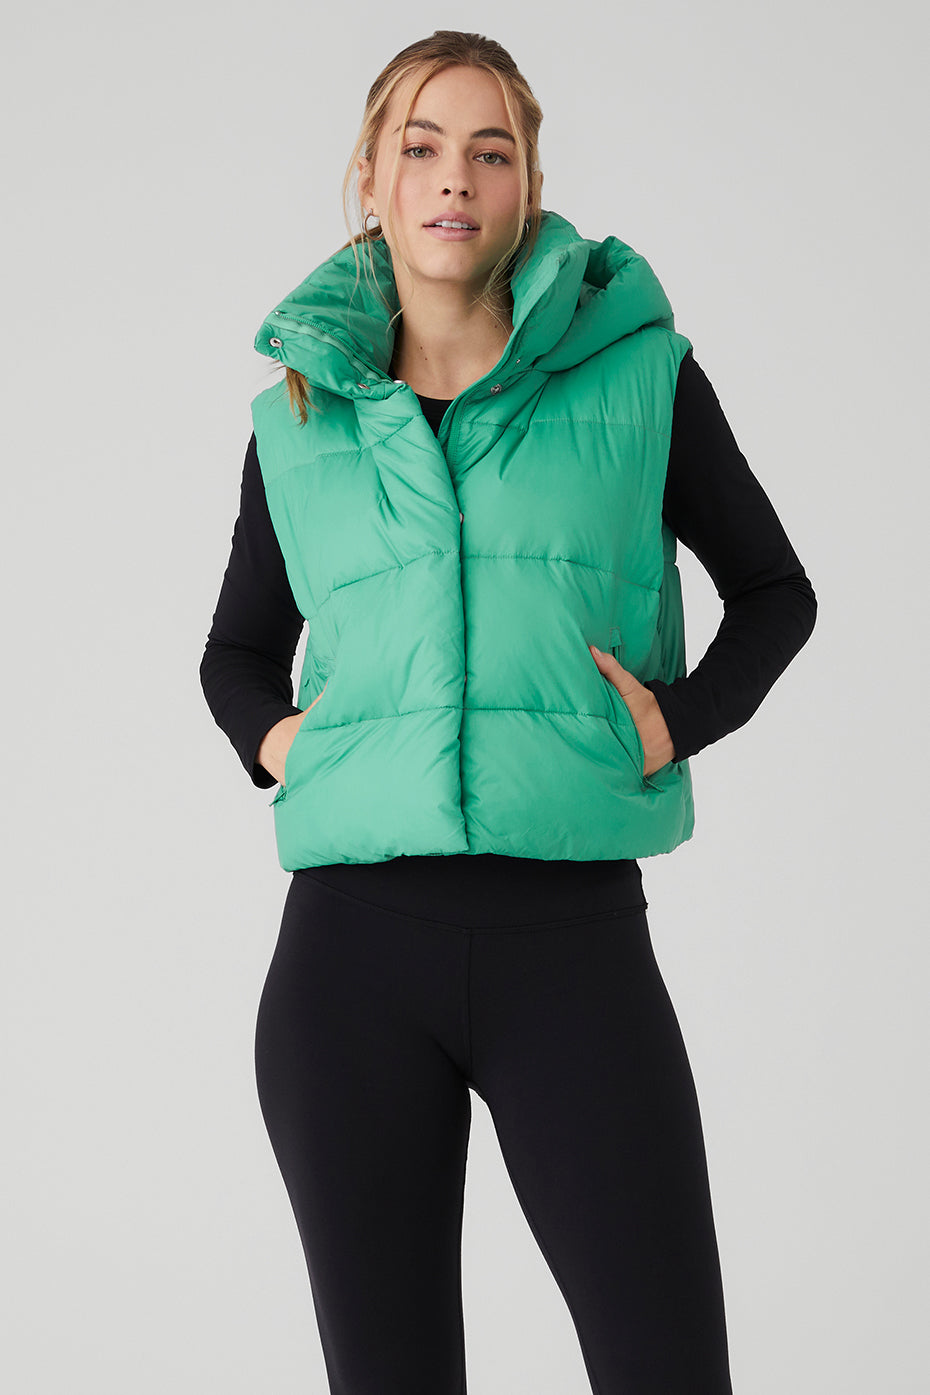 Alo Stage Puffer Jacket